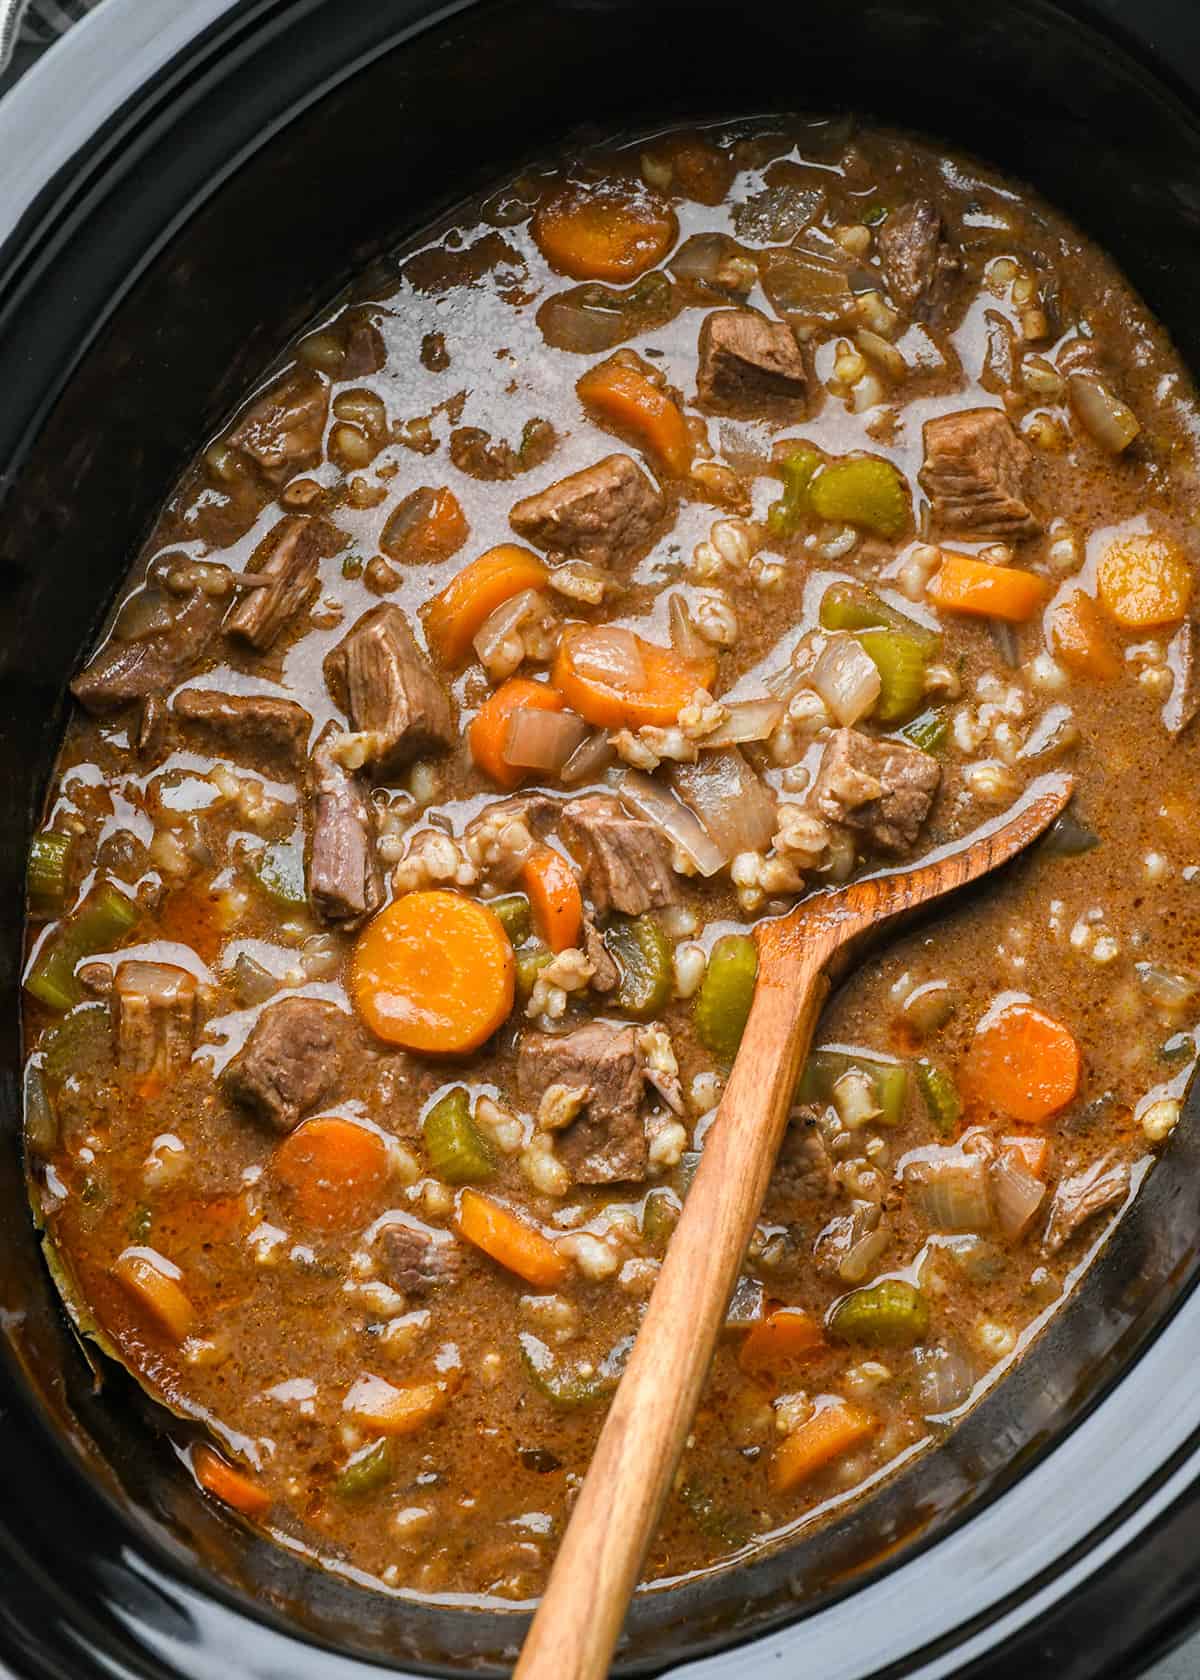 Beef and Barley Soup in a slow cooker after cooking